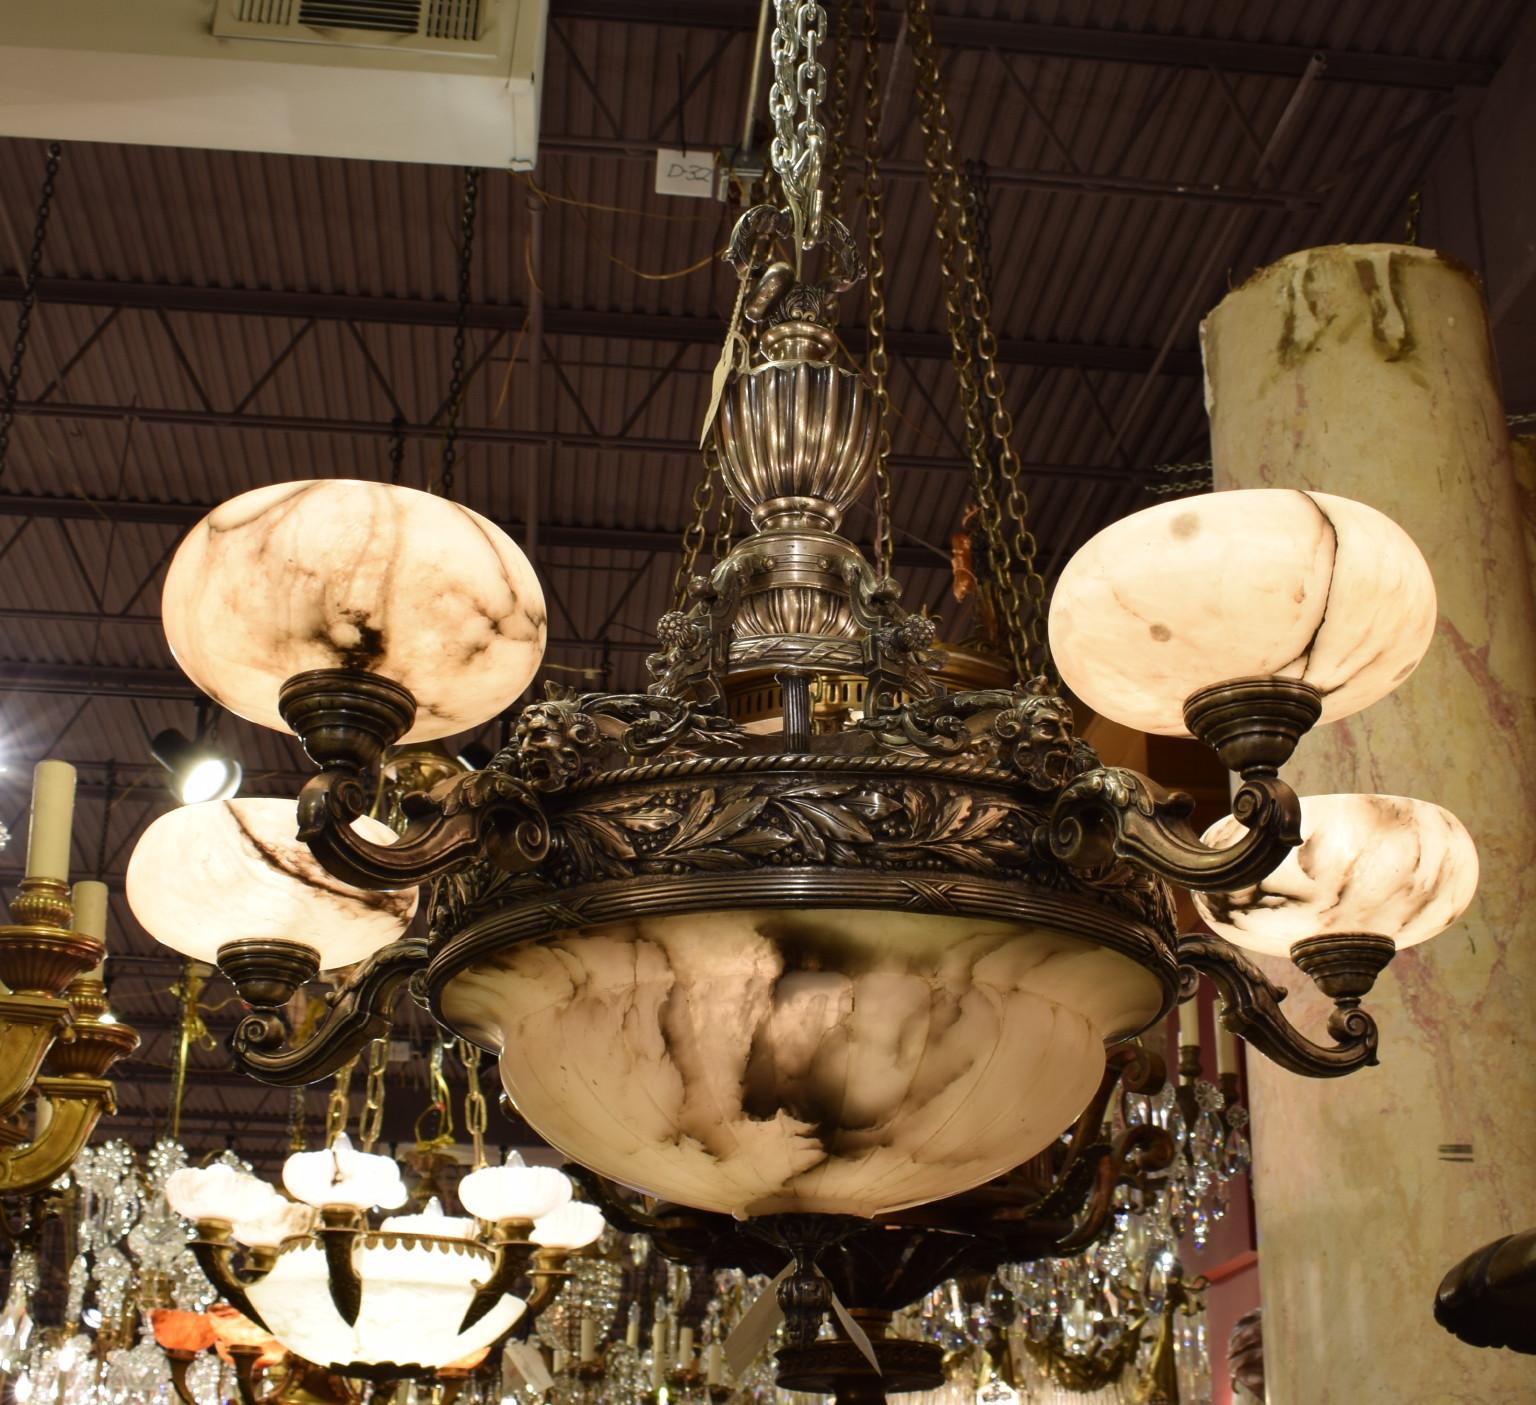 A fine silver over bronze & alabaster chandelier. France, circa 1920.
Dimensions: Height 30